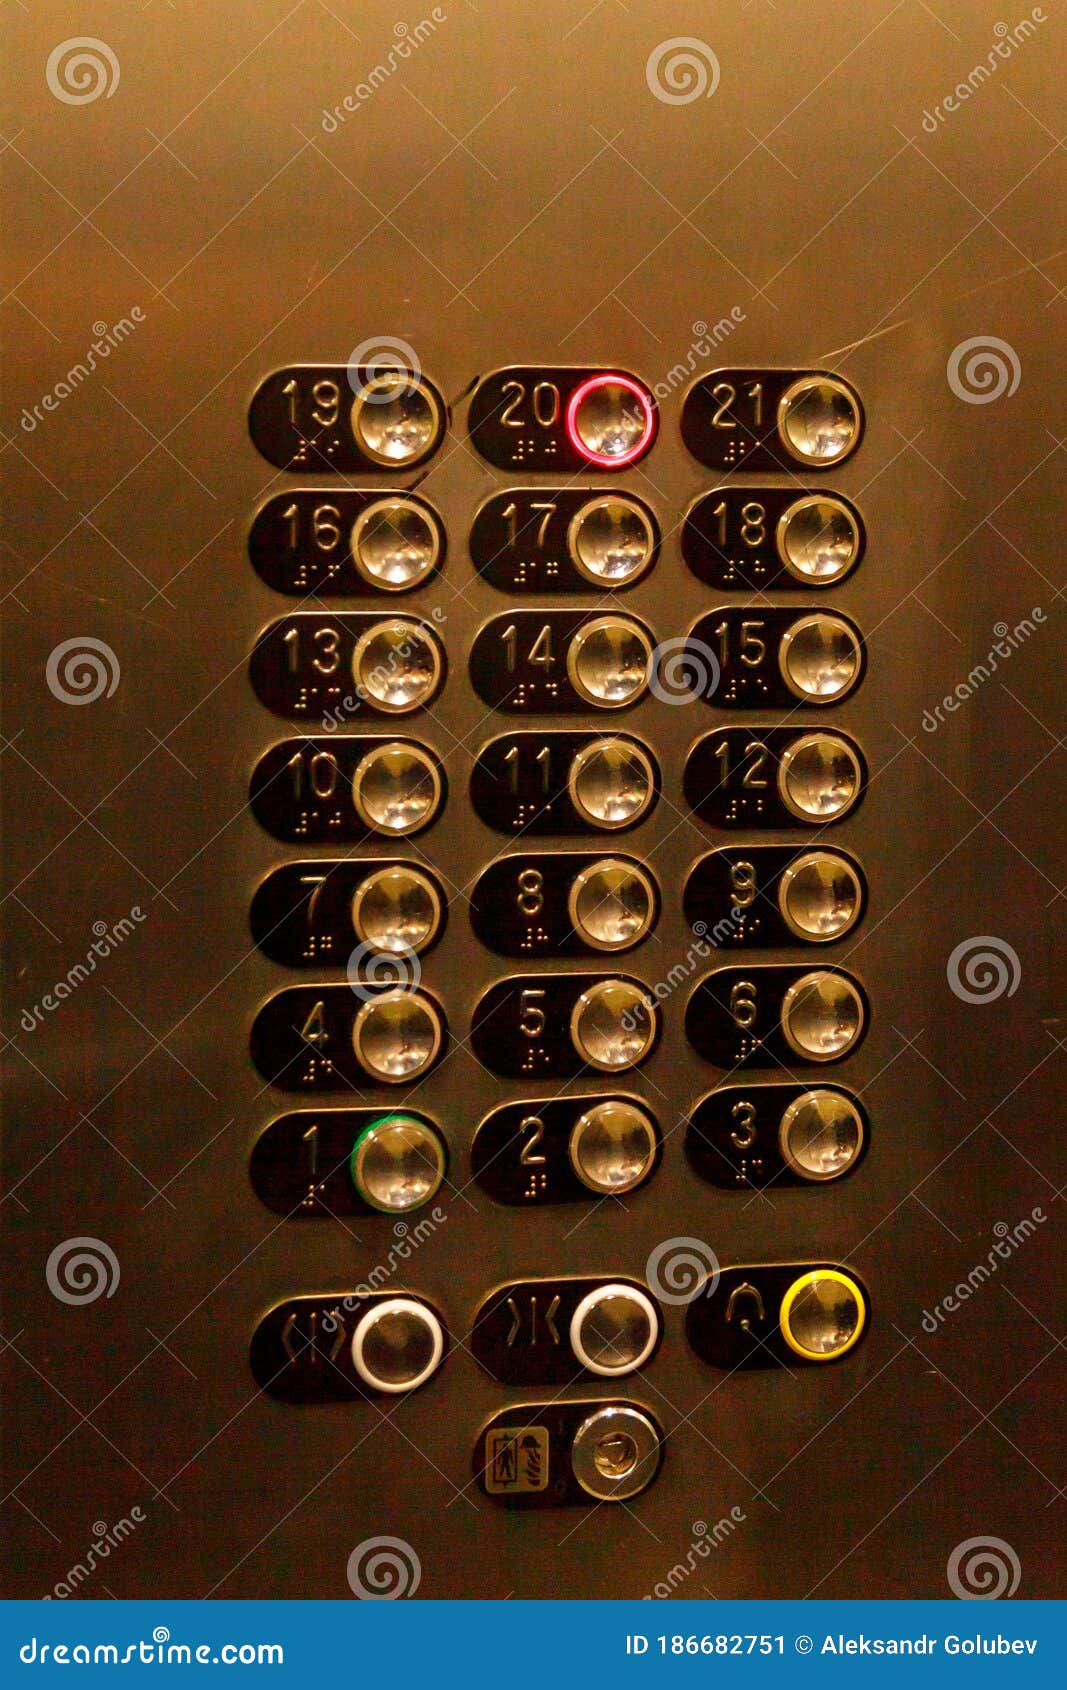 elevator buttons with the number 20 enabled